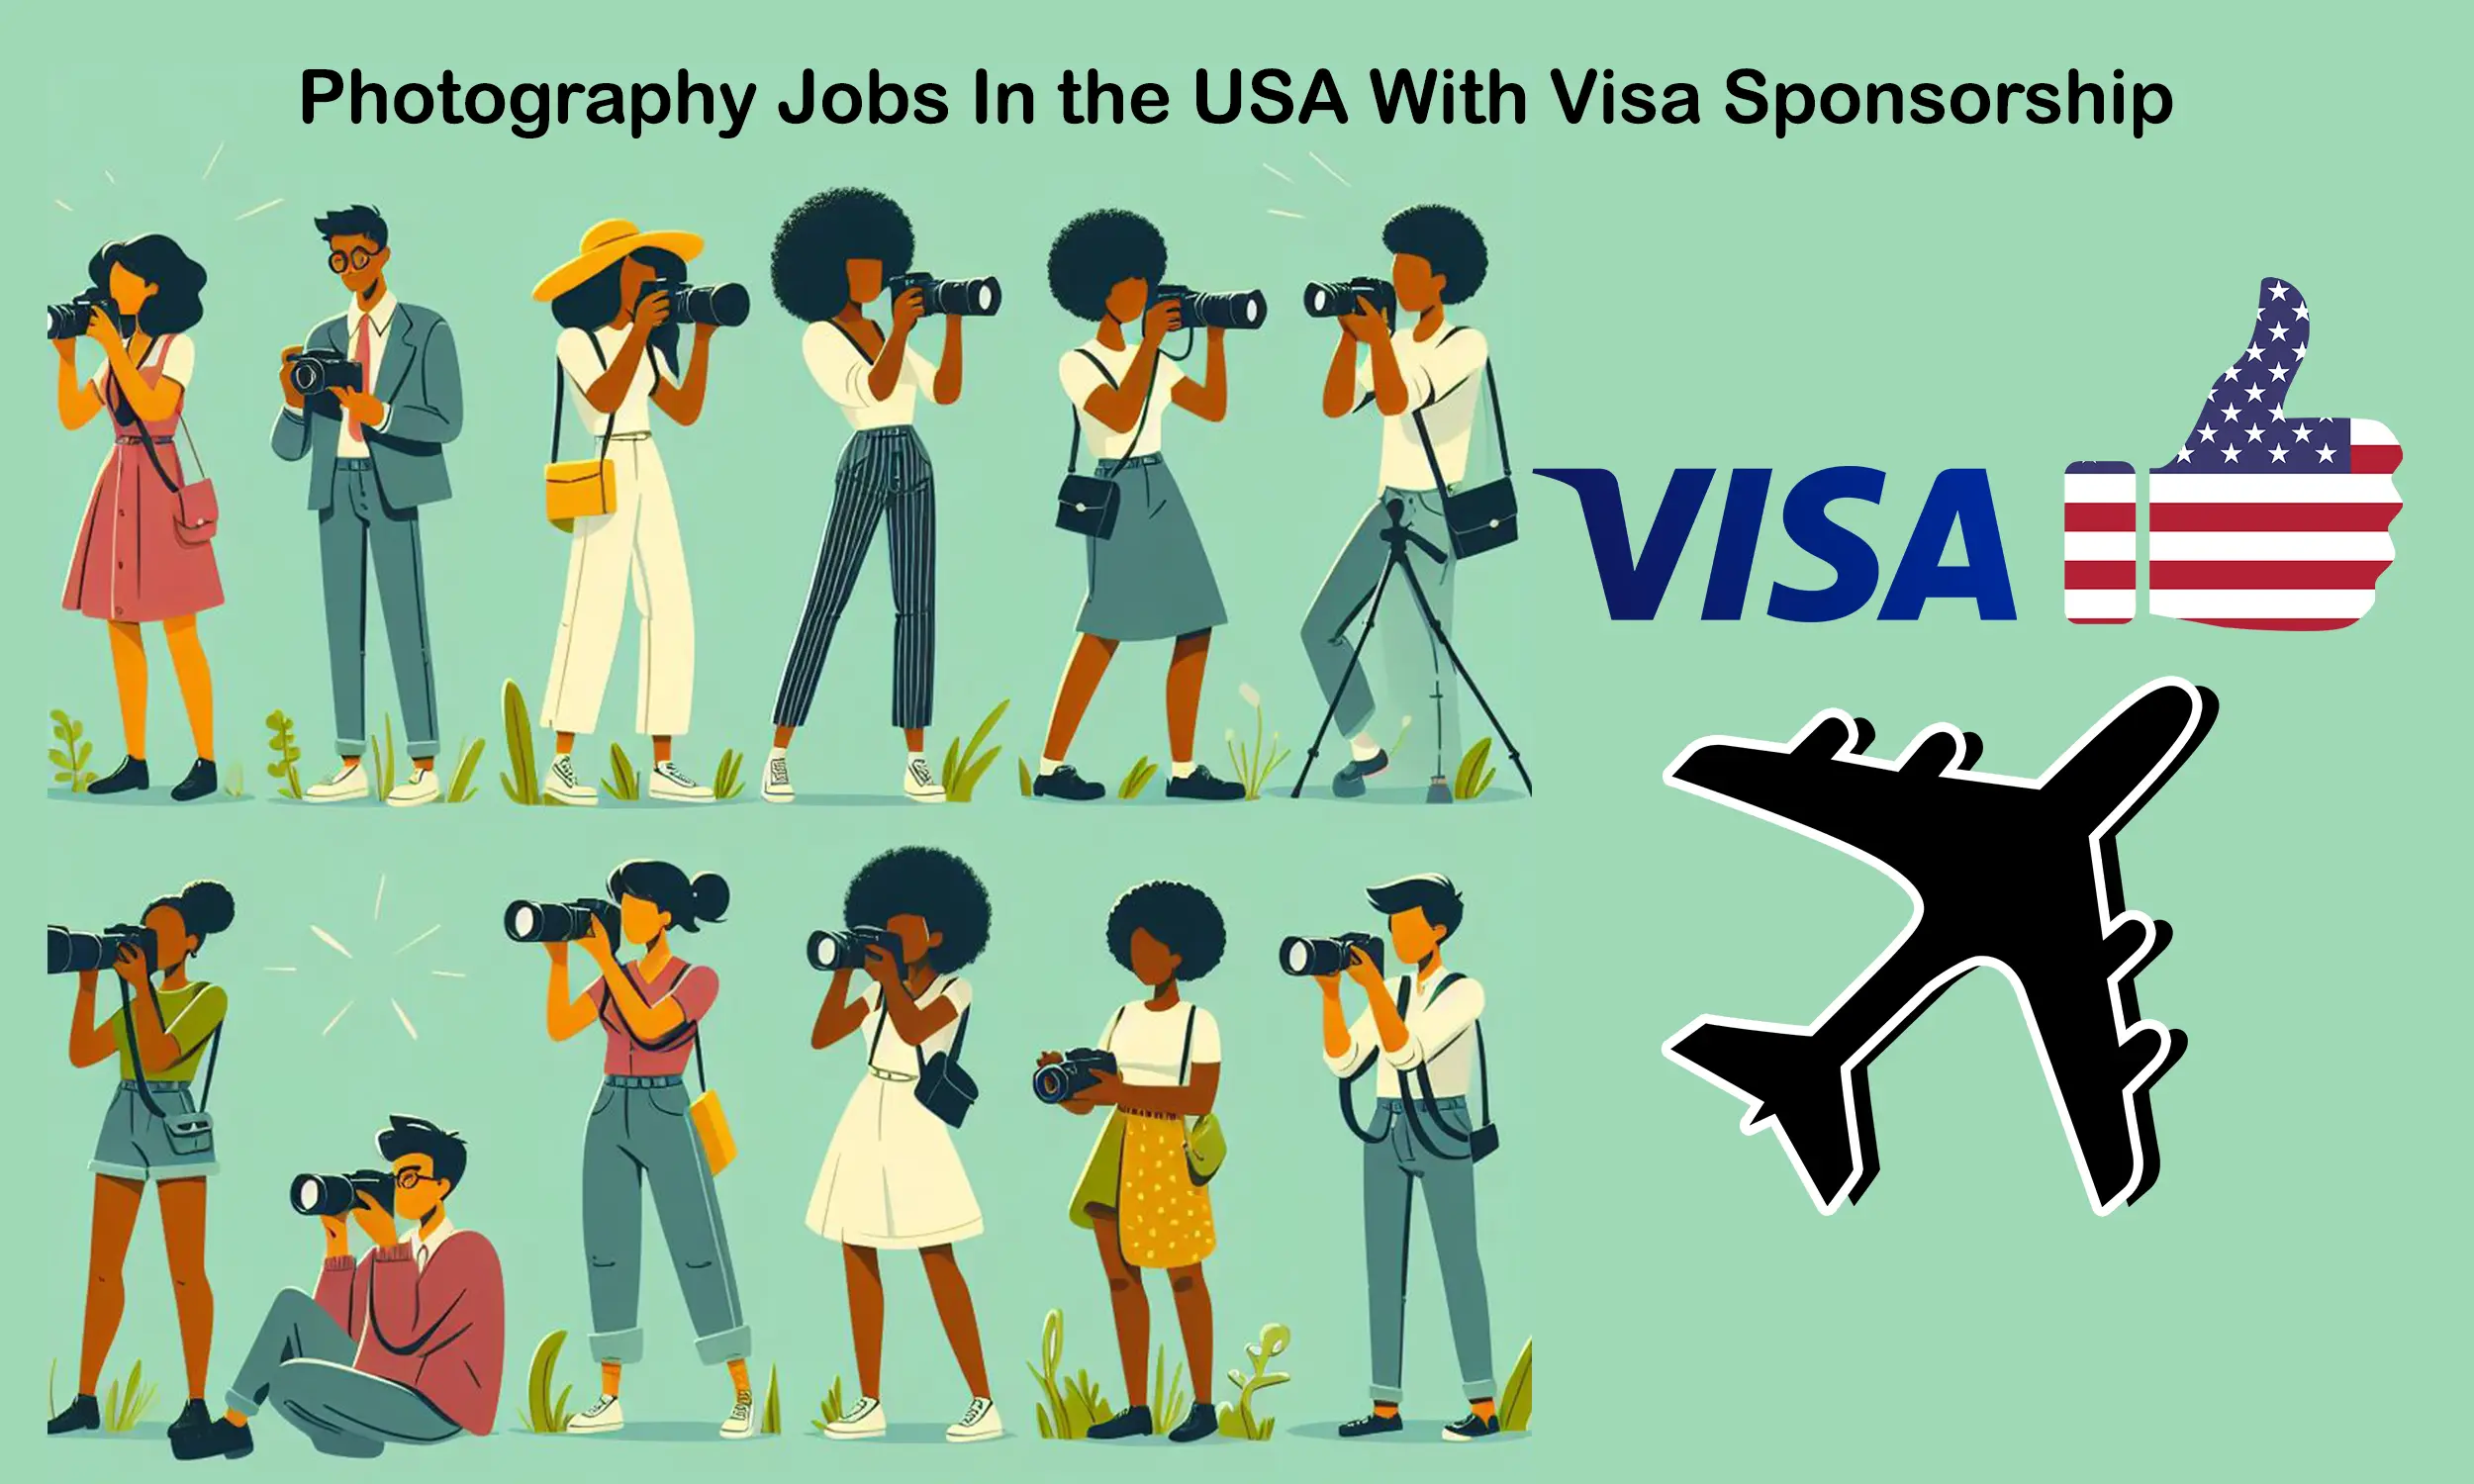 Photography Jobs in the USA with Visa Sponsorship